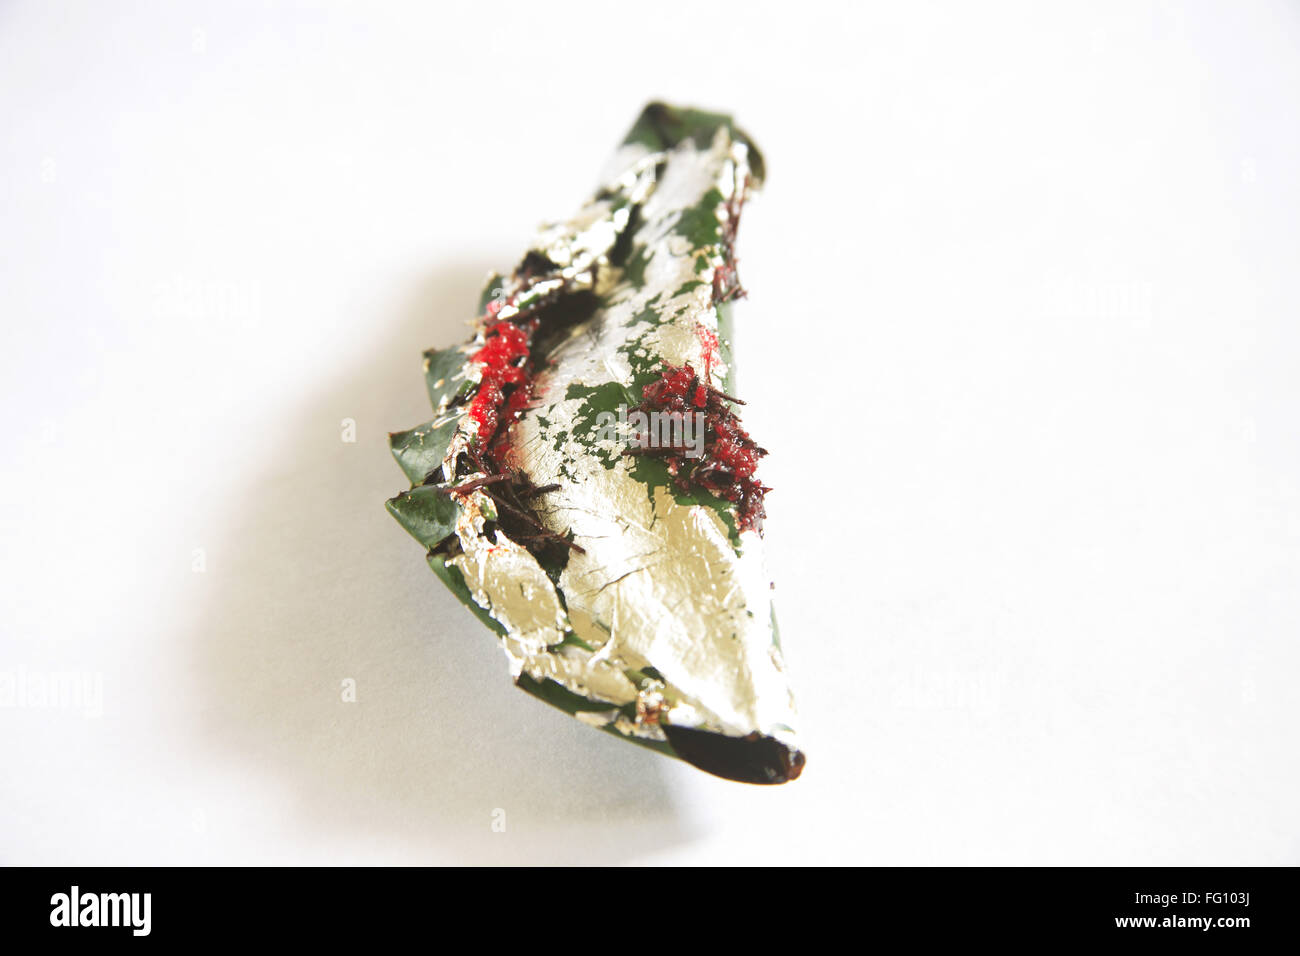 Gilouri pan prepared and folded in betel leaves on white background Stock Photo